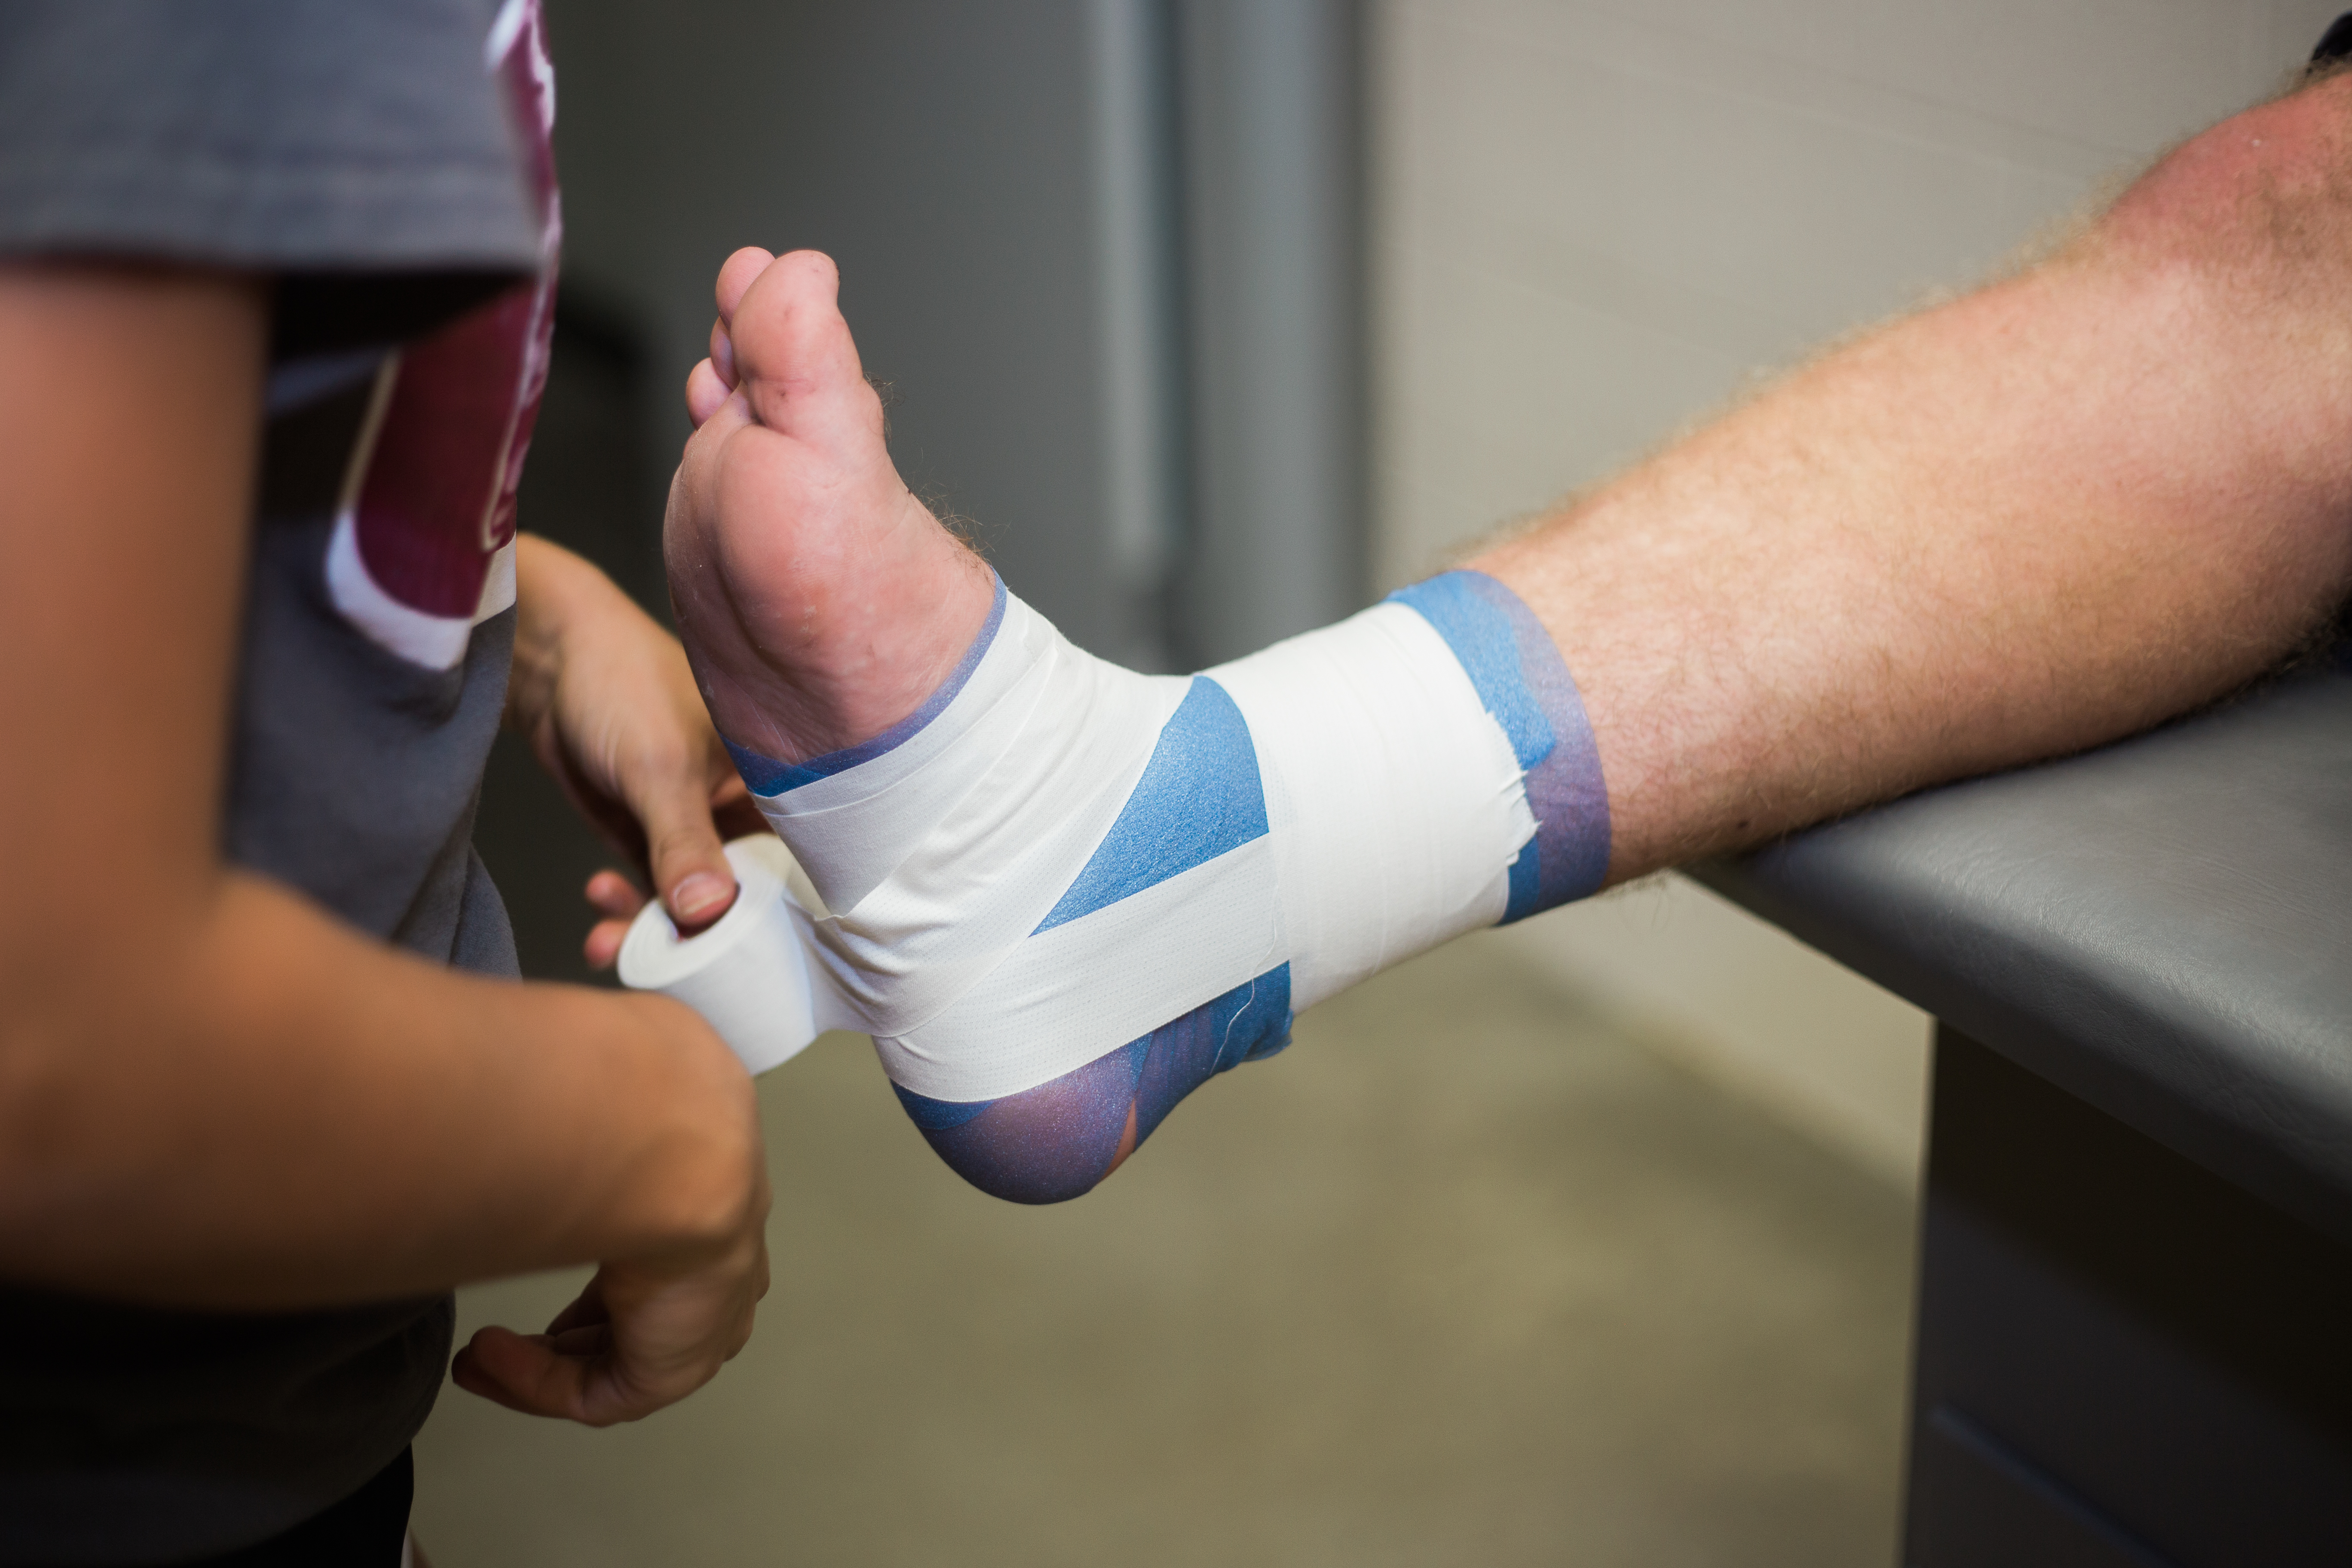 To Tape or Not to Tape when Ankle Injuries Arise? - 7 Ankle Injury Myths